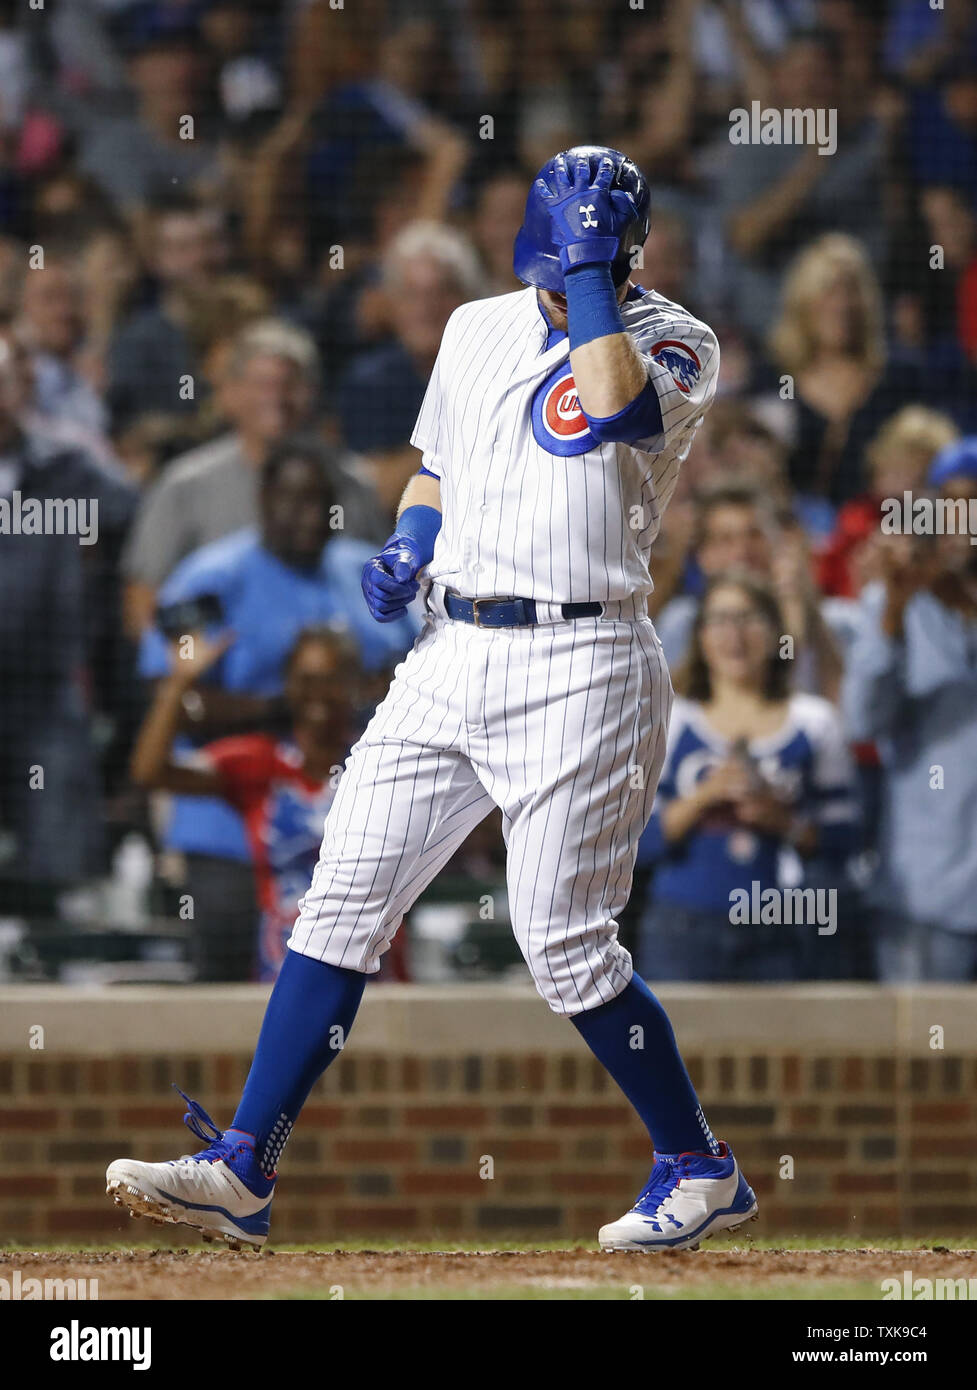 Chicago Cubs center fielder Ian Happ crosses home plate after hitting  three-run home run against the Cincinnati Reds in the seventh inning at  Wrigley Field on September 14, 2018 in Chicago. Photo